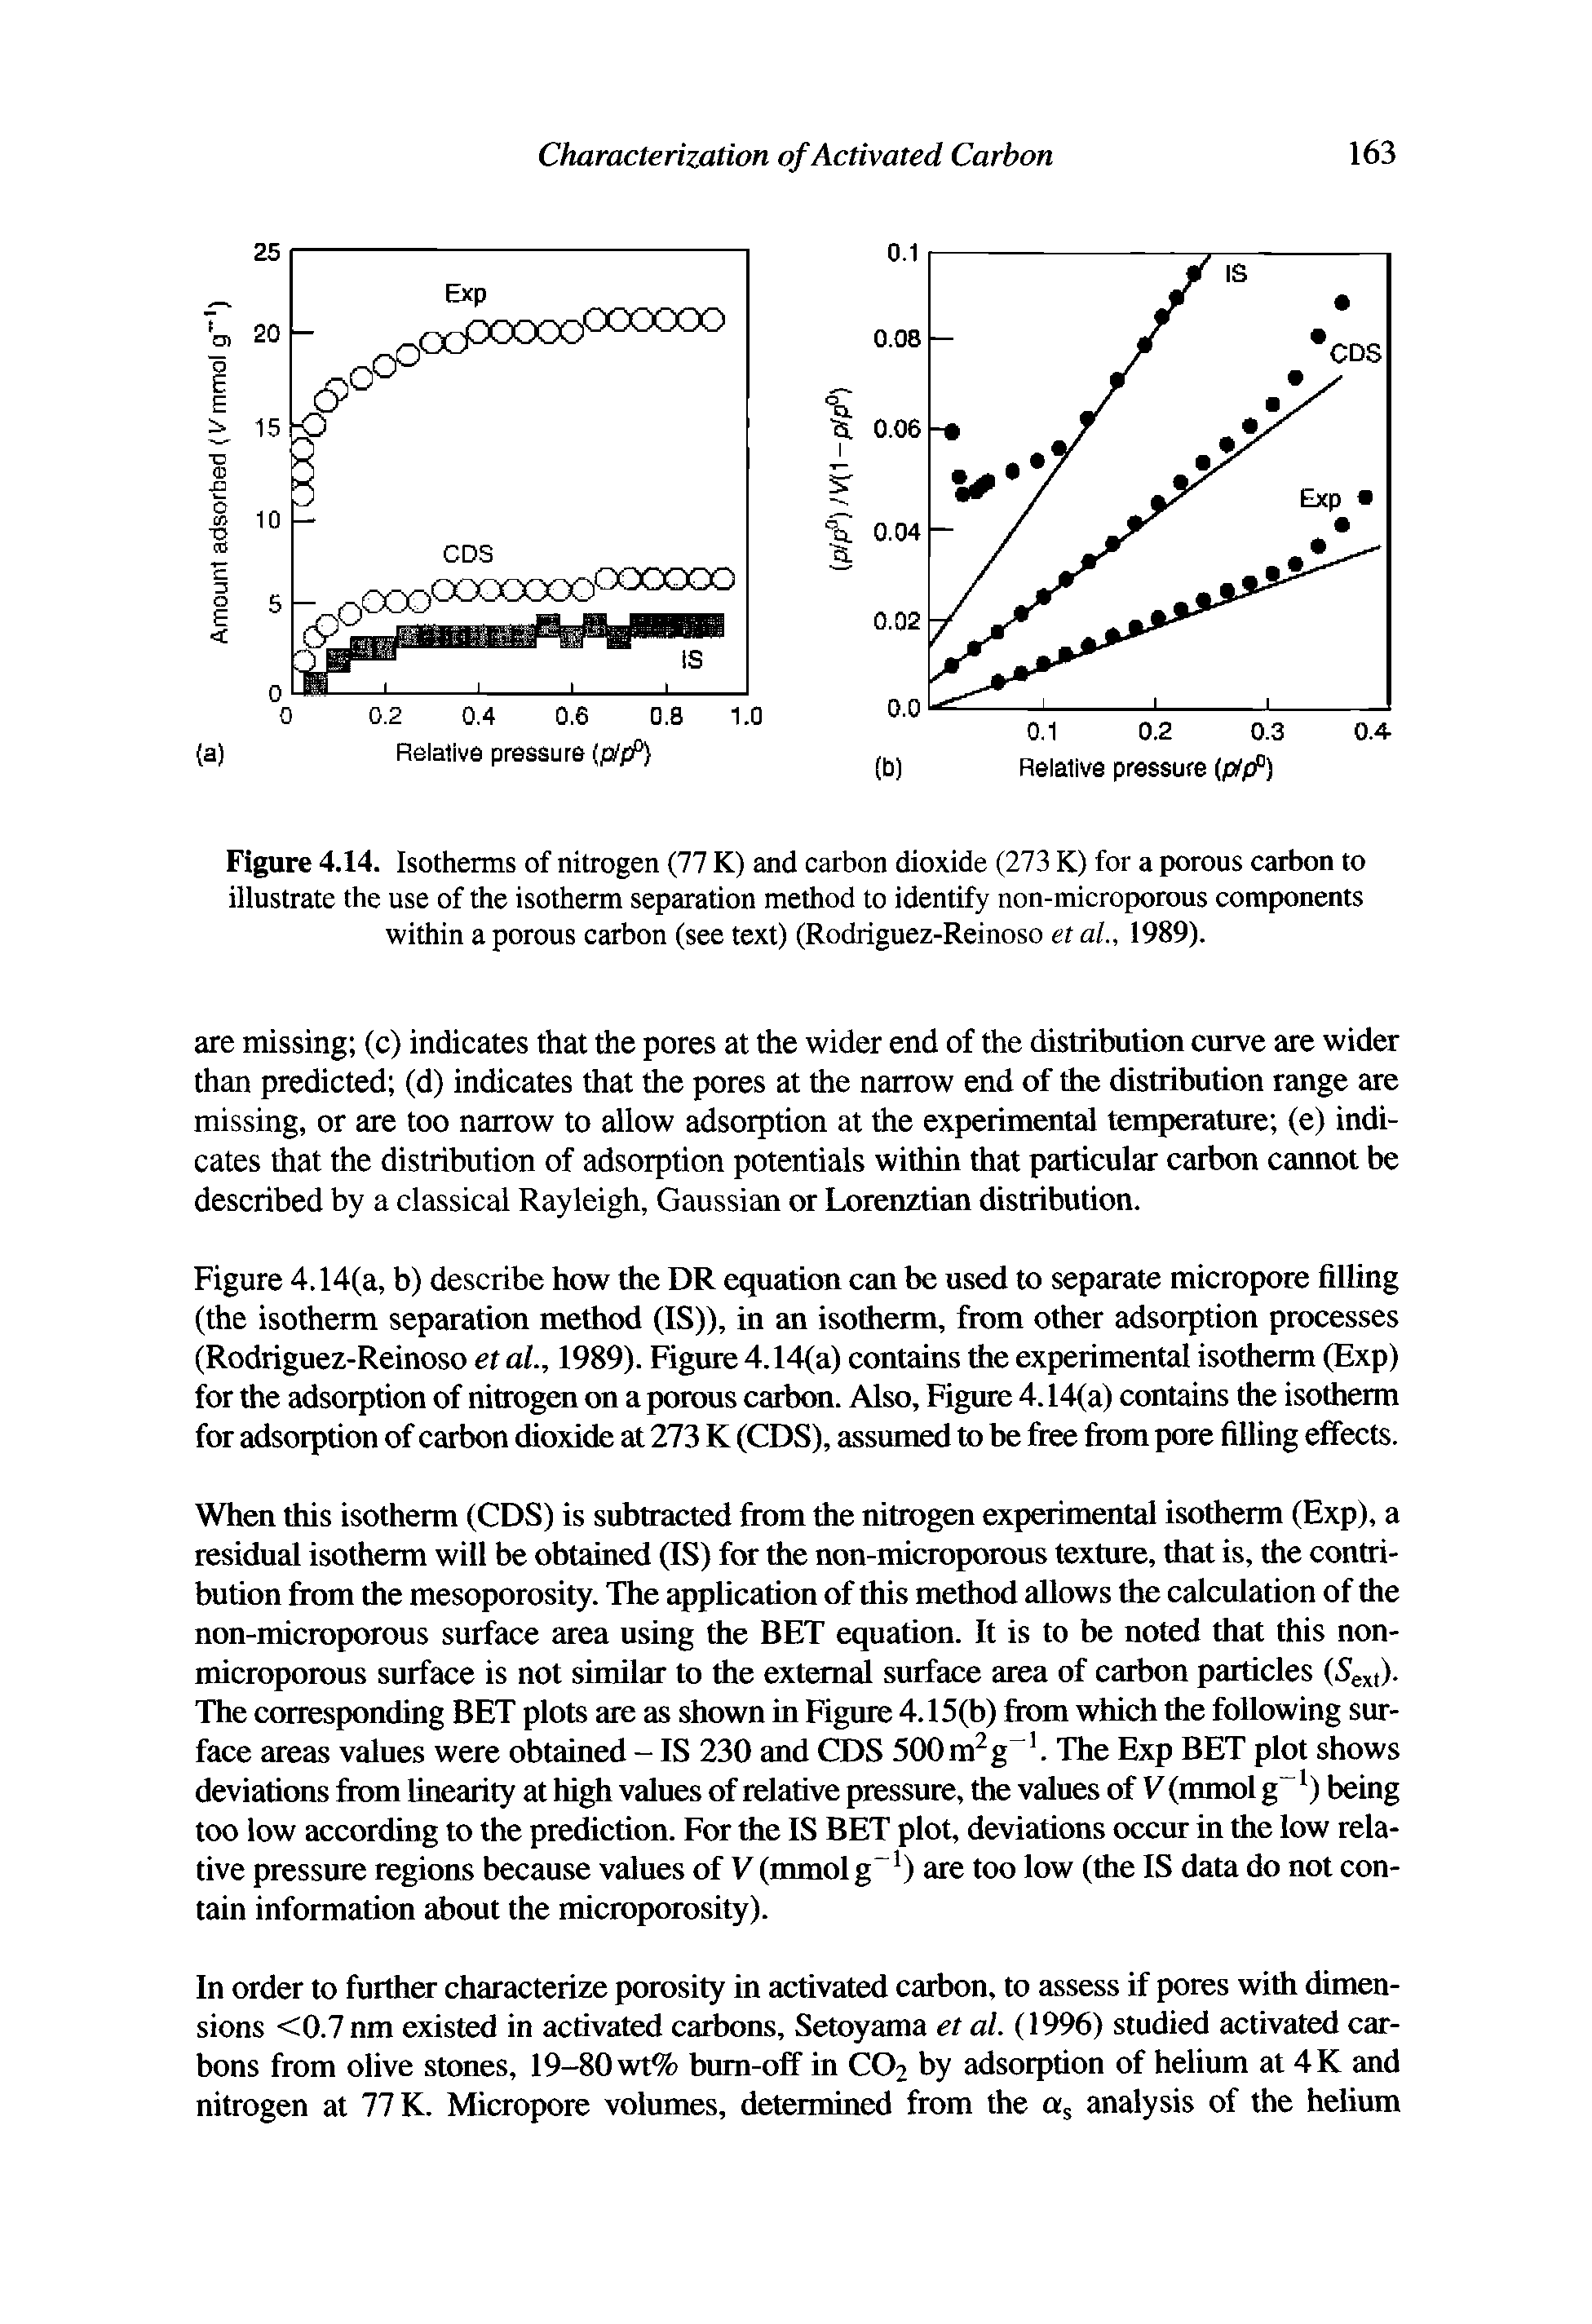 Figure 4.14. Isotherms of nitrogen (77 K) and carbon dioxide (273 K) for a porous carbon to illustrate the use of the isotherm separation method to identify non-microporous components within a porous carbon (see text) (Rodriguez-Reinoso et al 1989).